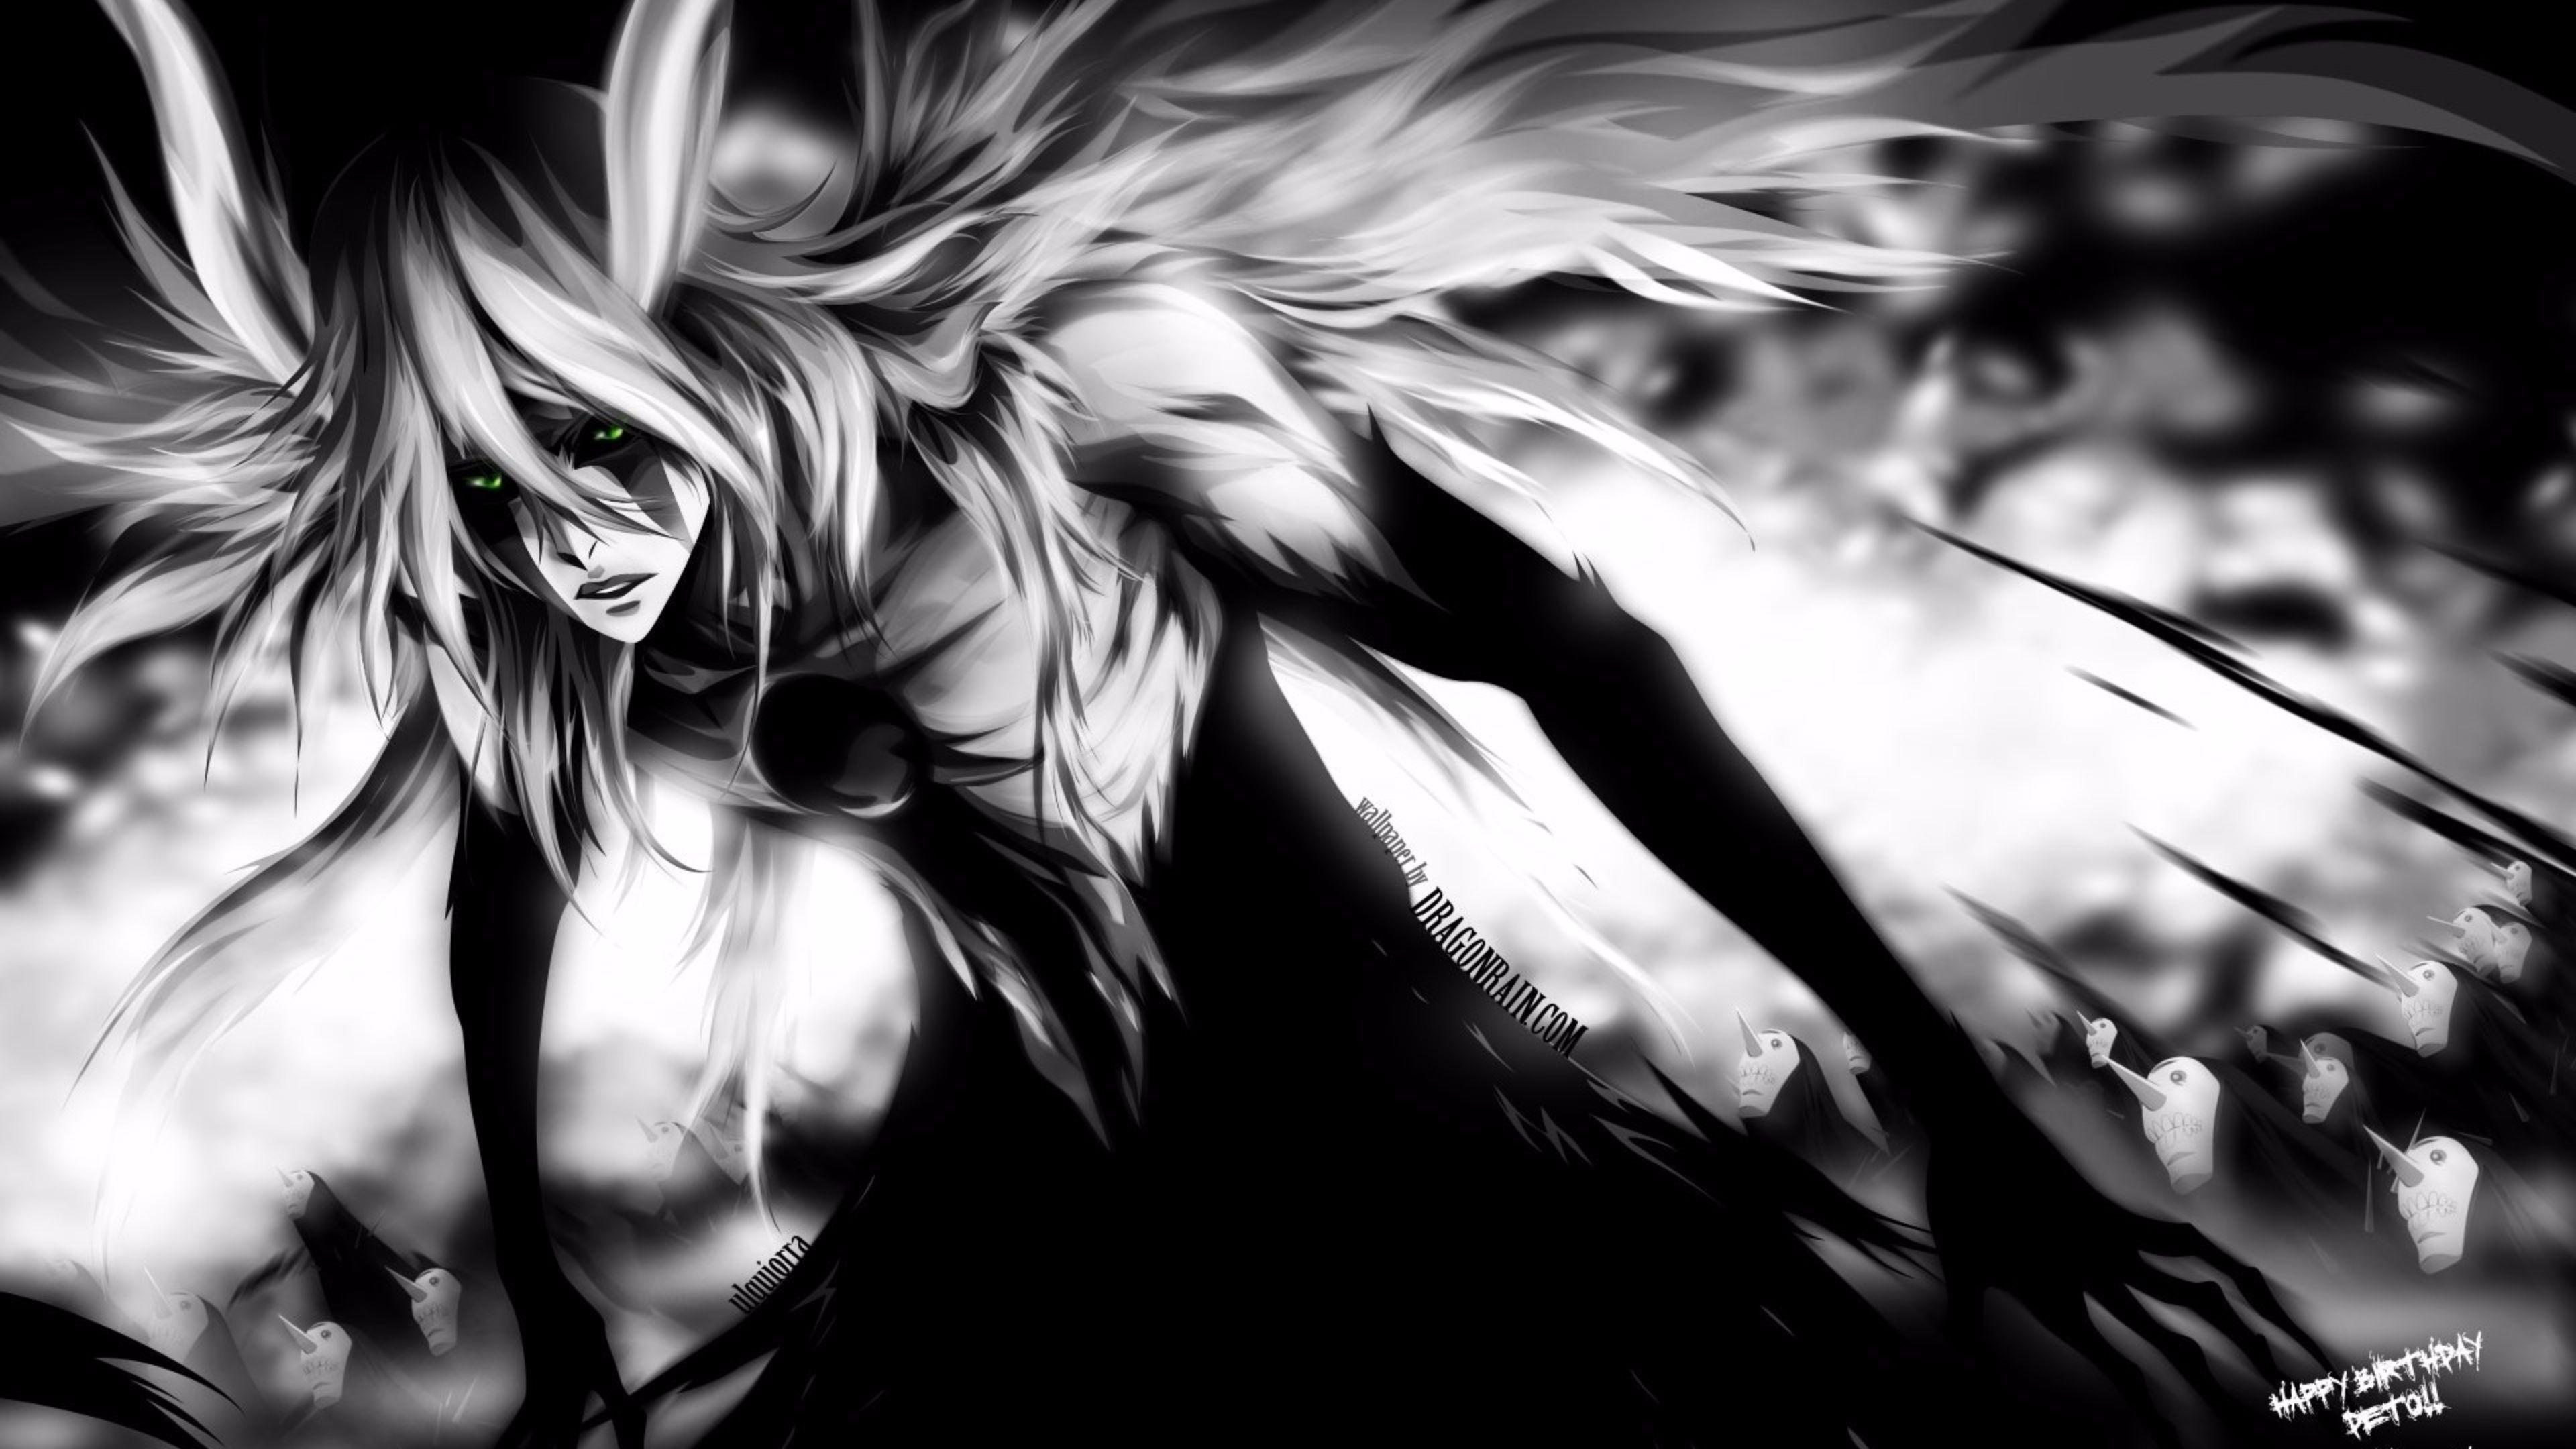 Black and White 2016 4K Anime Wallpapers